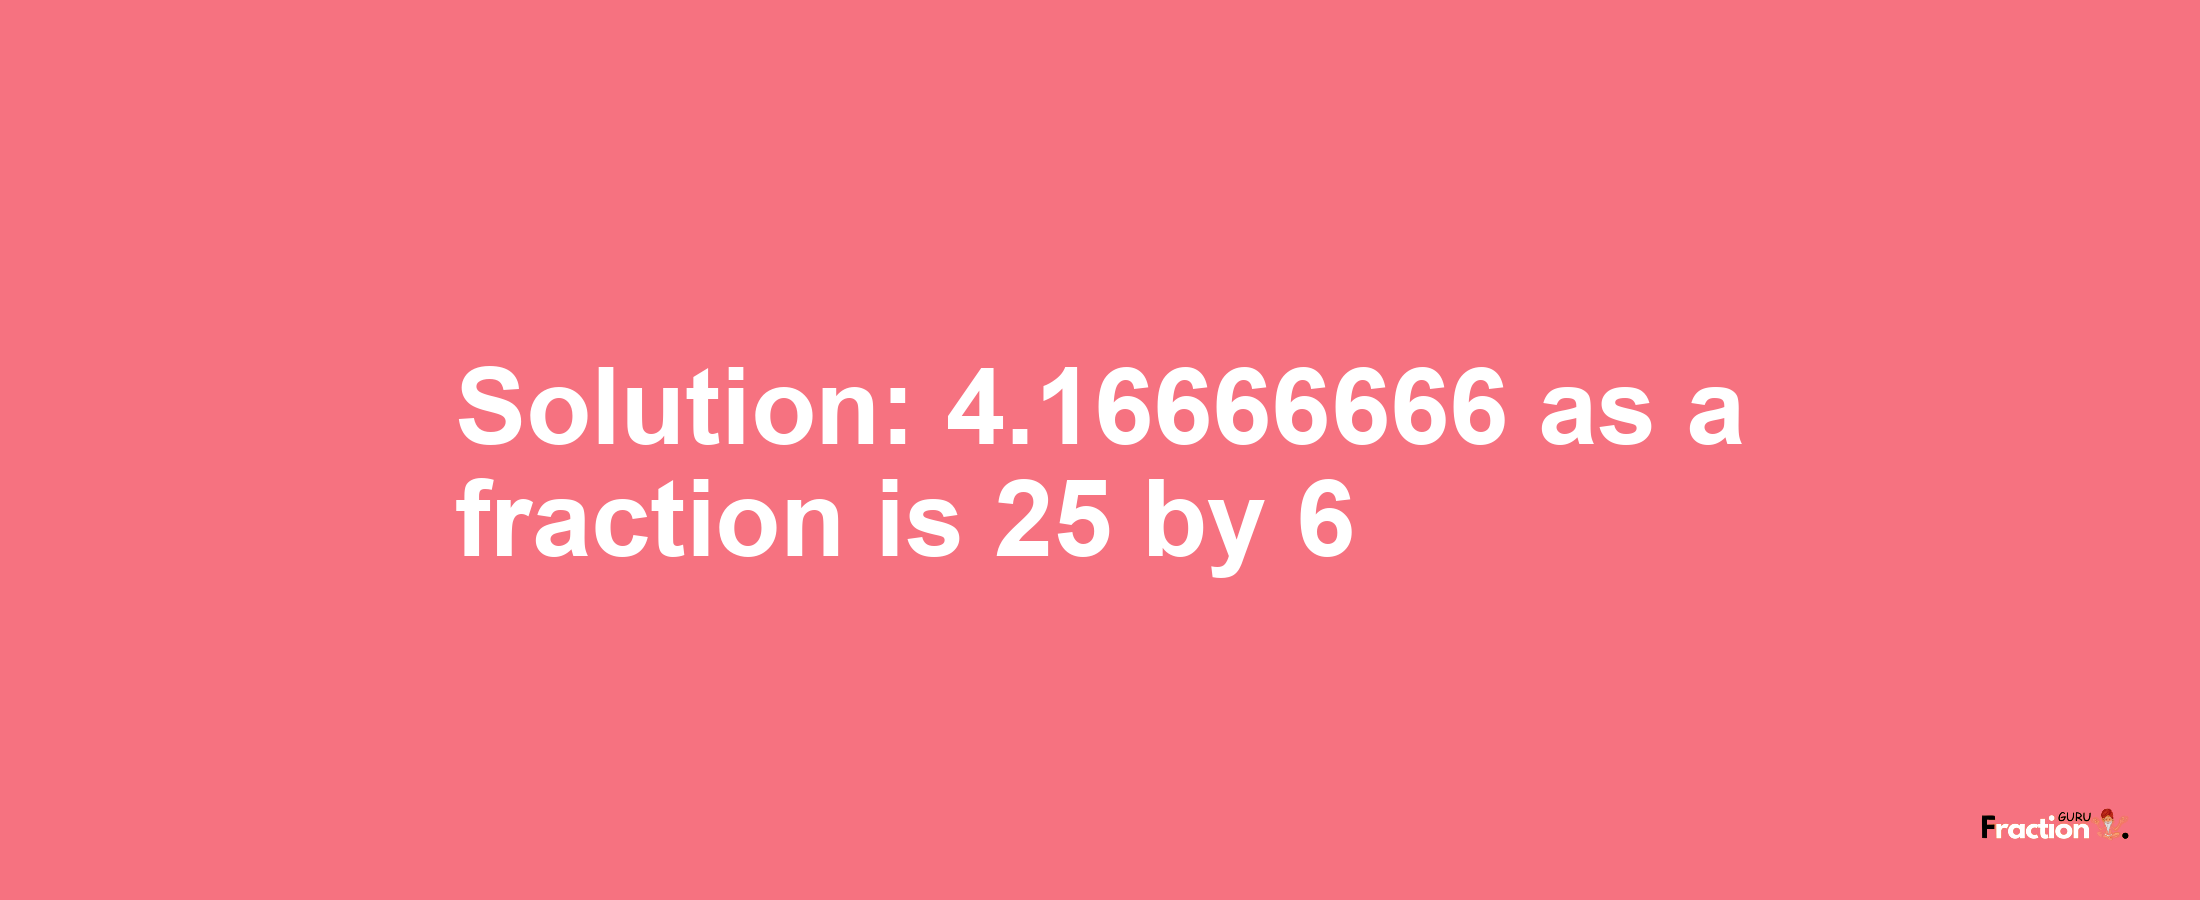 Solution:4.16666666 as a fraction is 25/6